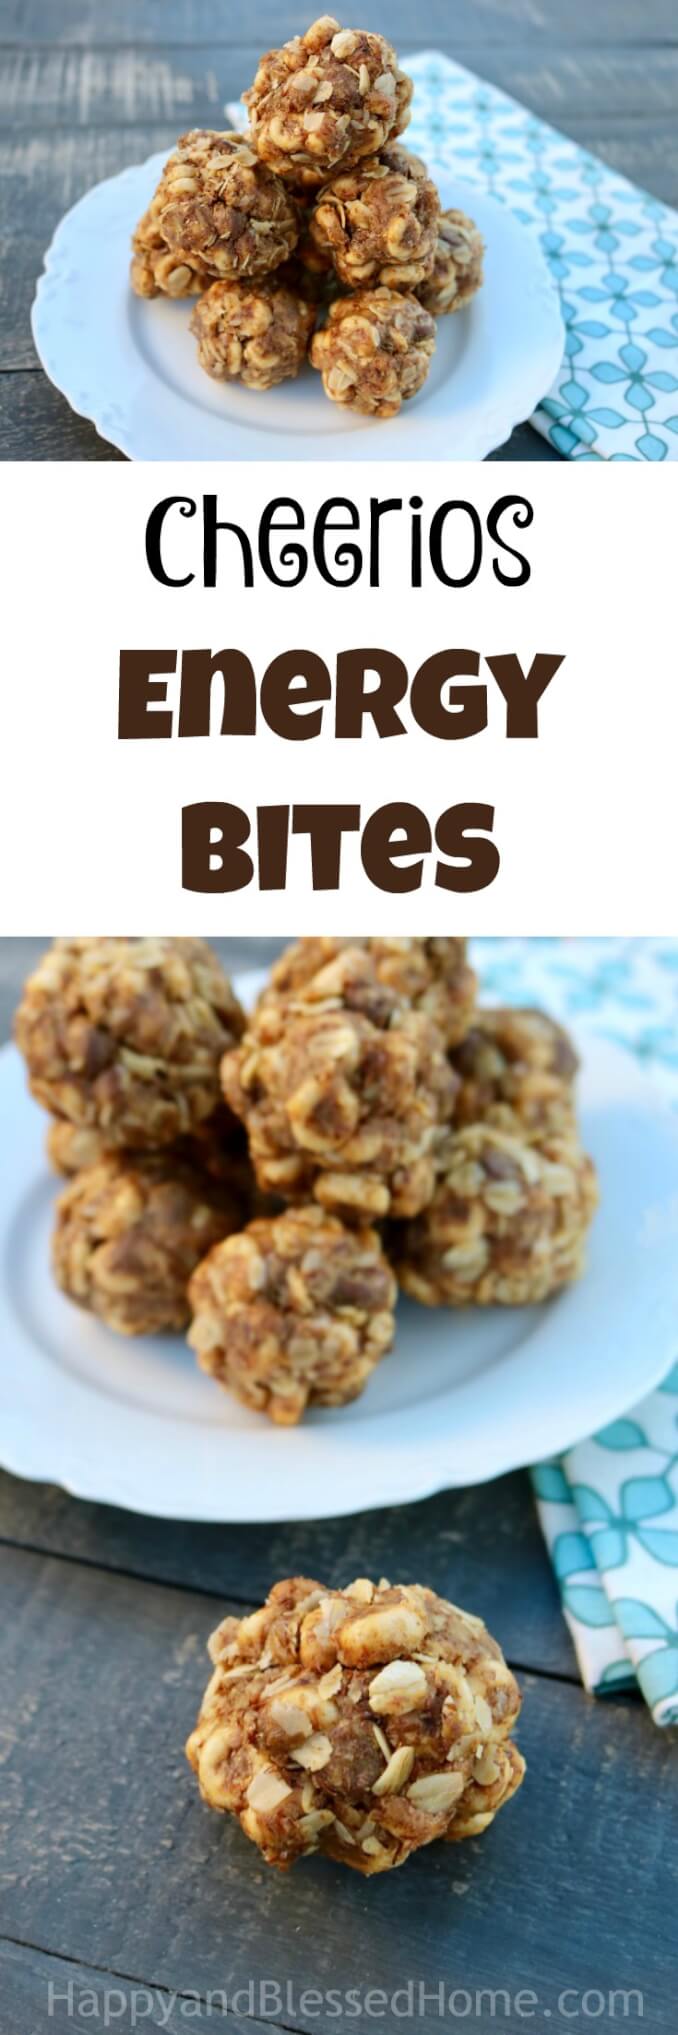 Easy Tutorial: How to Make an Energy Bites Recipe that Kids Love - Just use your favorite cereal. This example includes a Cheerios Energy Bites Recipe with Box Top tips. Hooray for protein powered snacks that my kids love! 